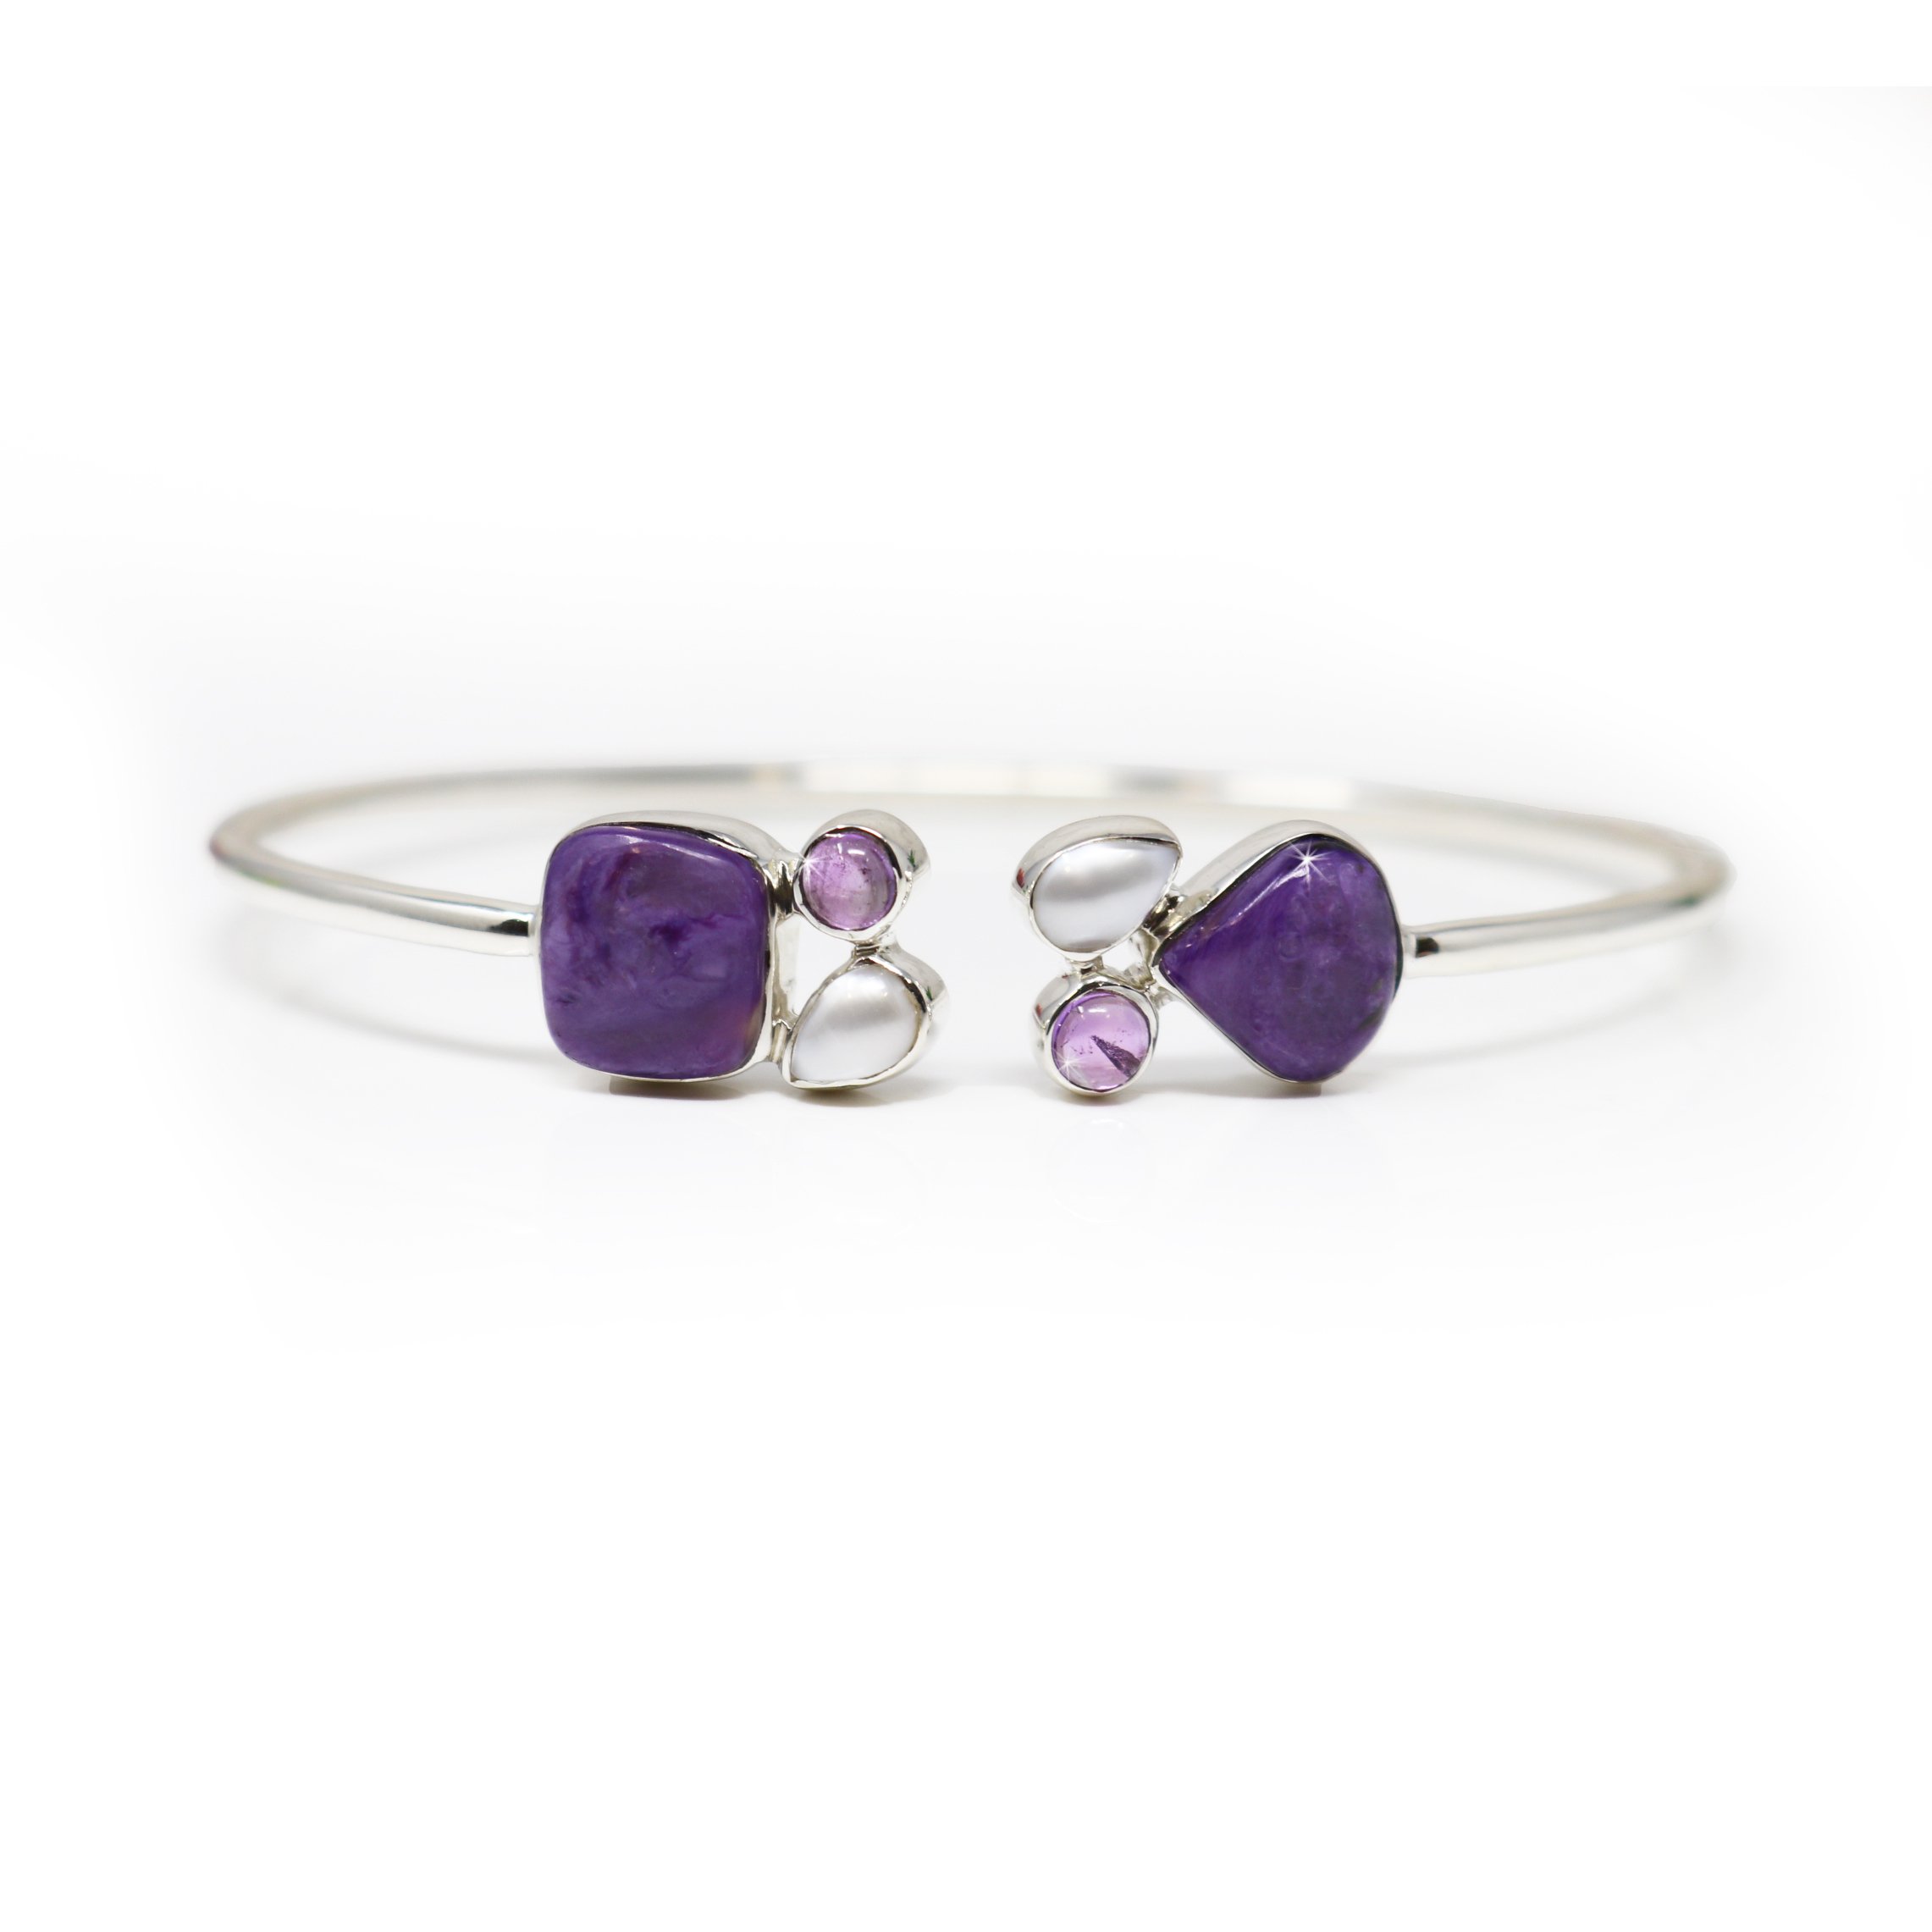 Charoite Twist Bracelet - Square & Pear Cabochon with Round Amethyst Cabochon & Freshwater Pearl Pear - 925 Sterling Silver Bezel & Band